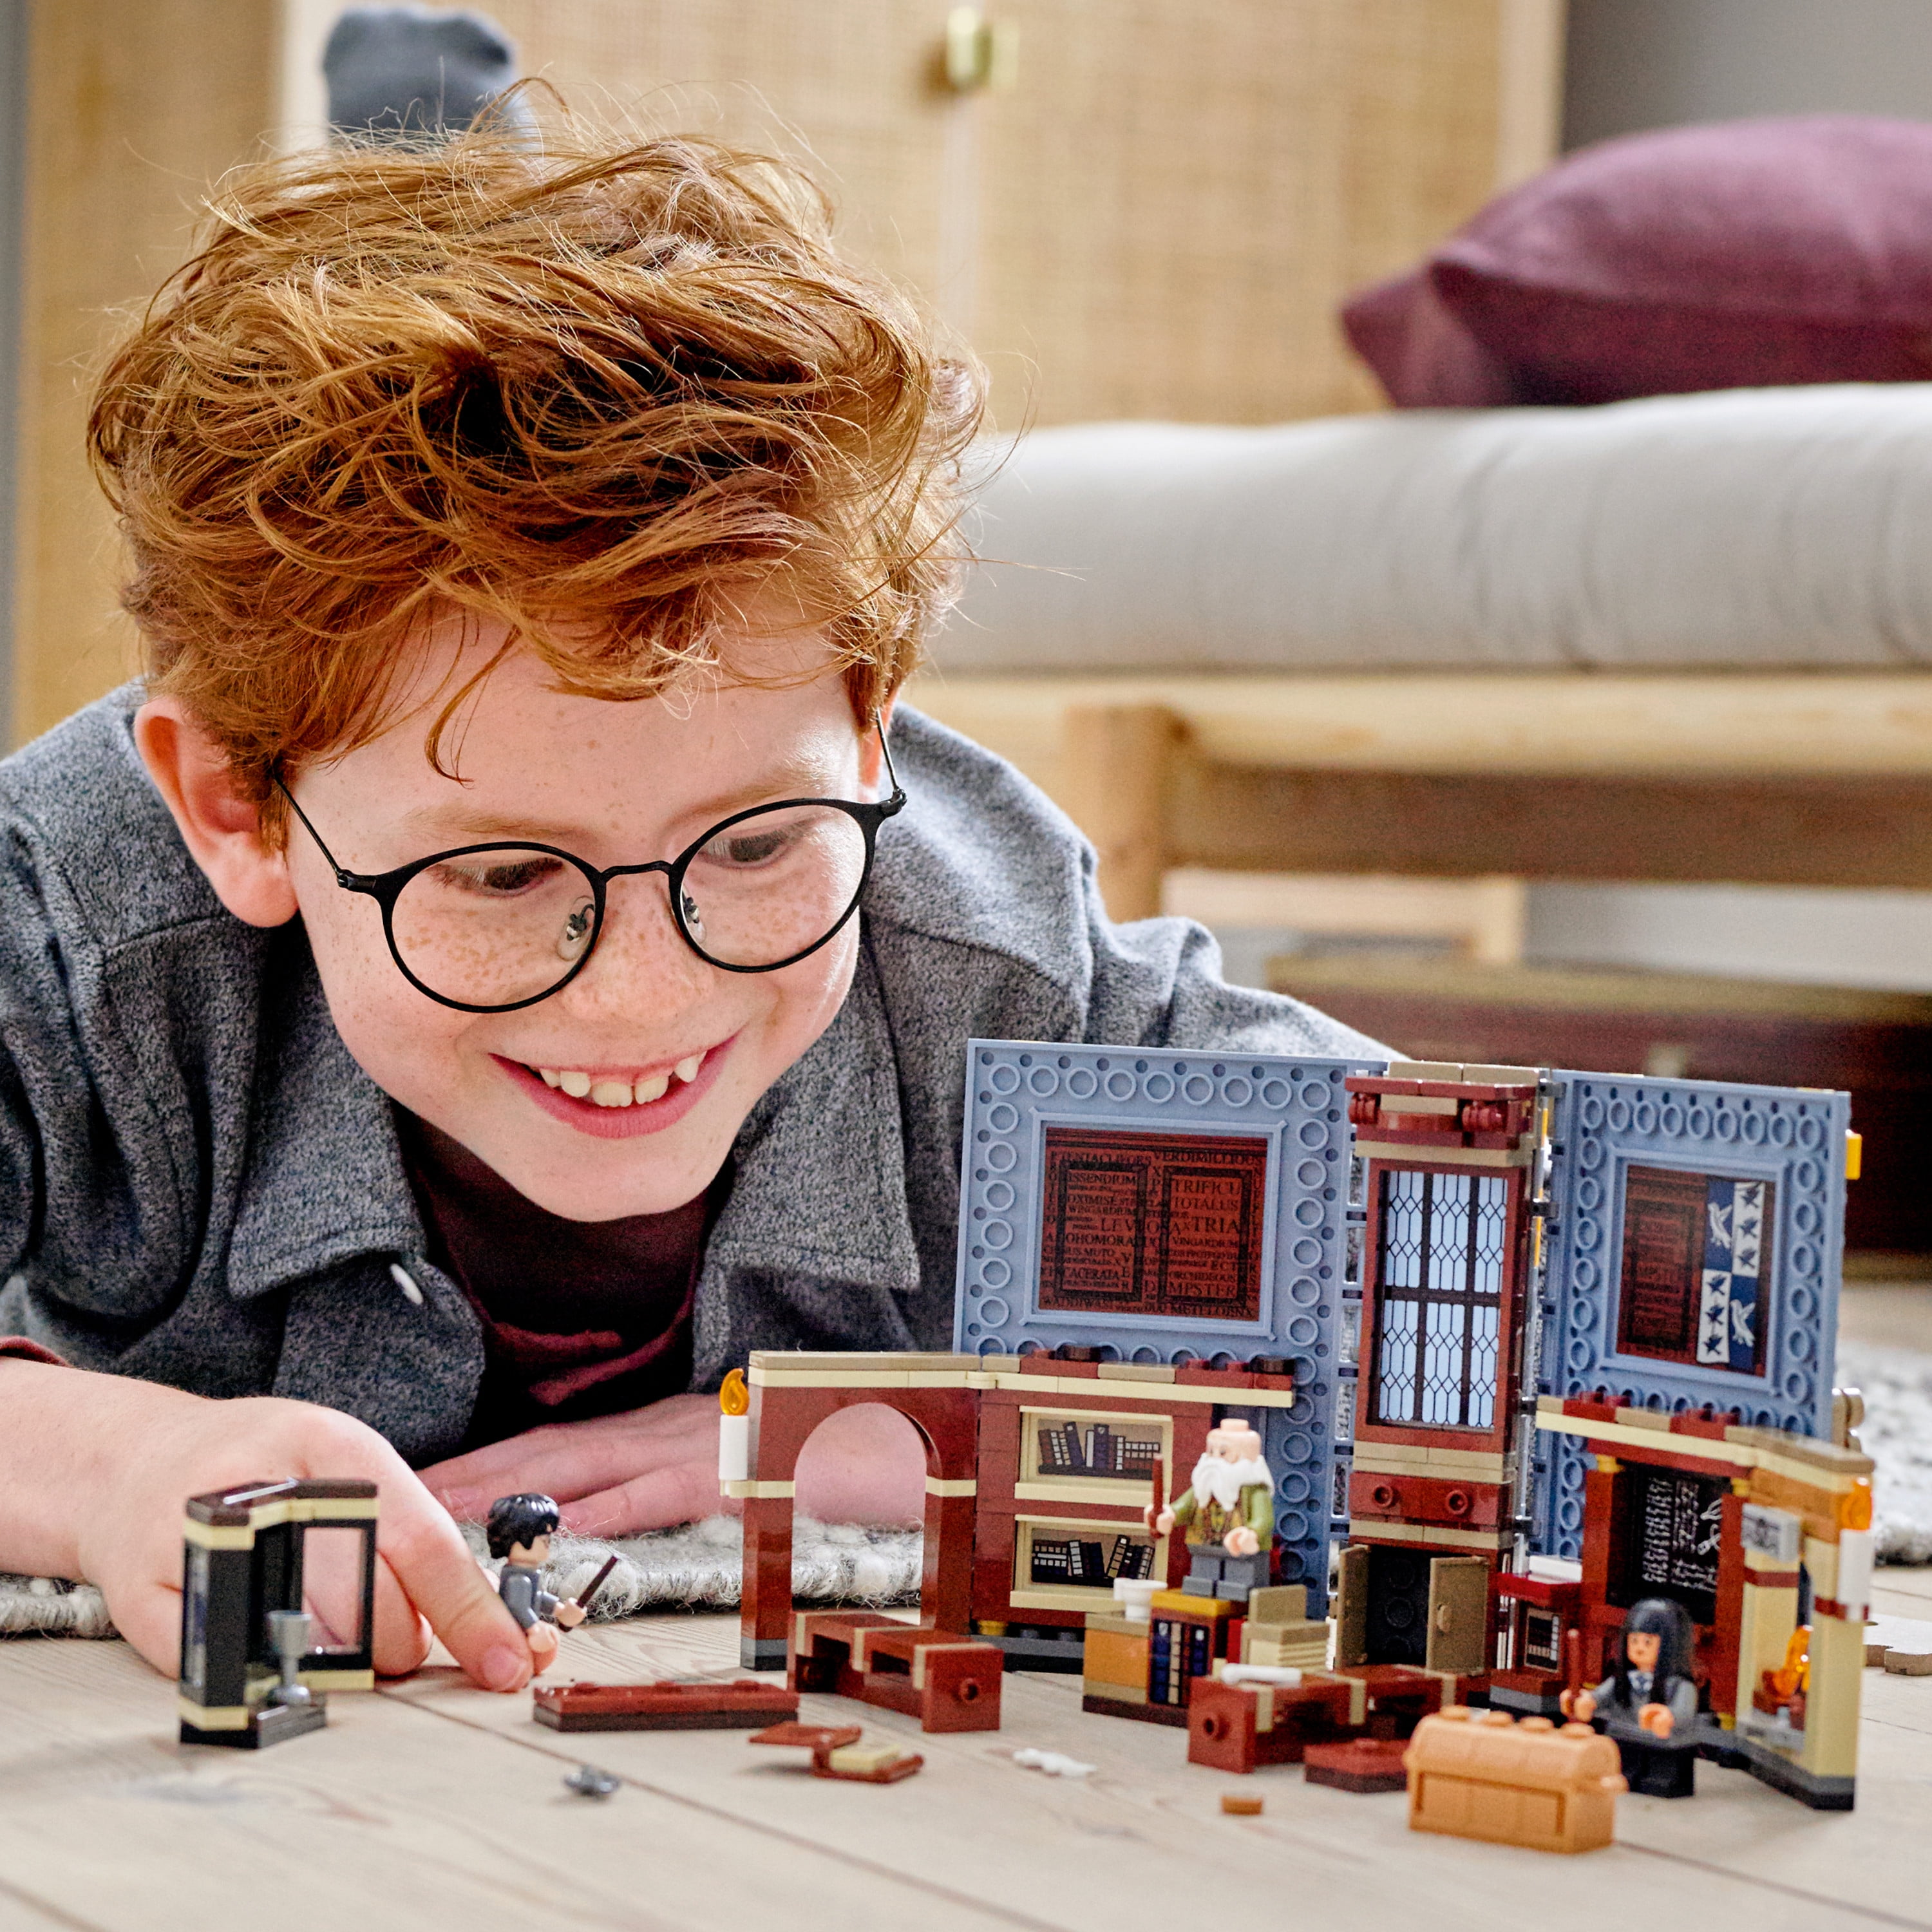 Lego 76385 Harry Potter - Hogwarts Moment: Charms Class